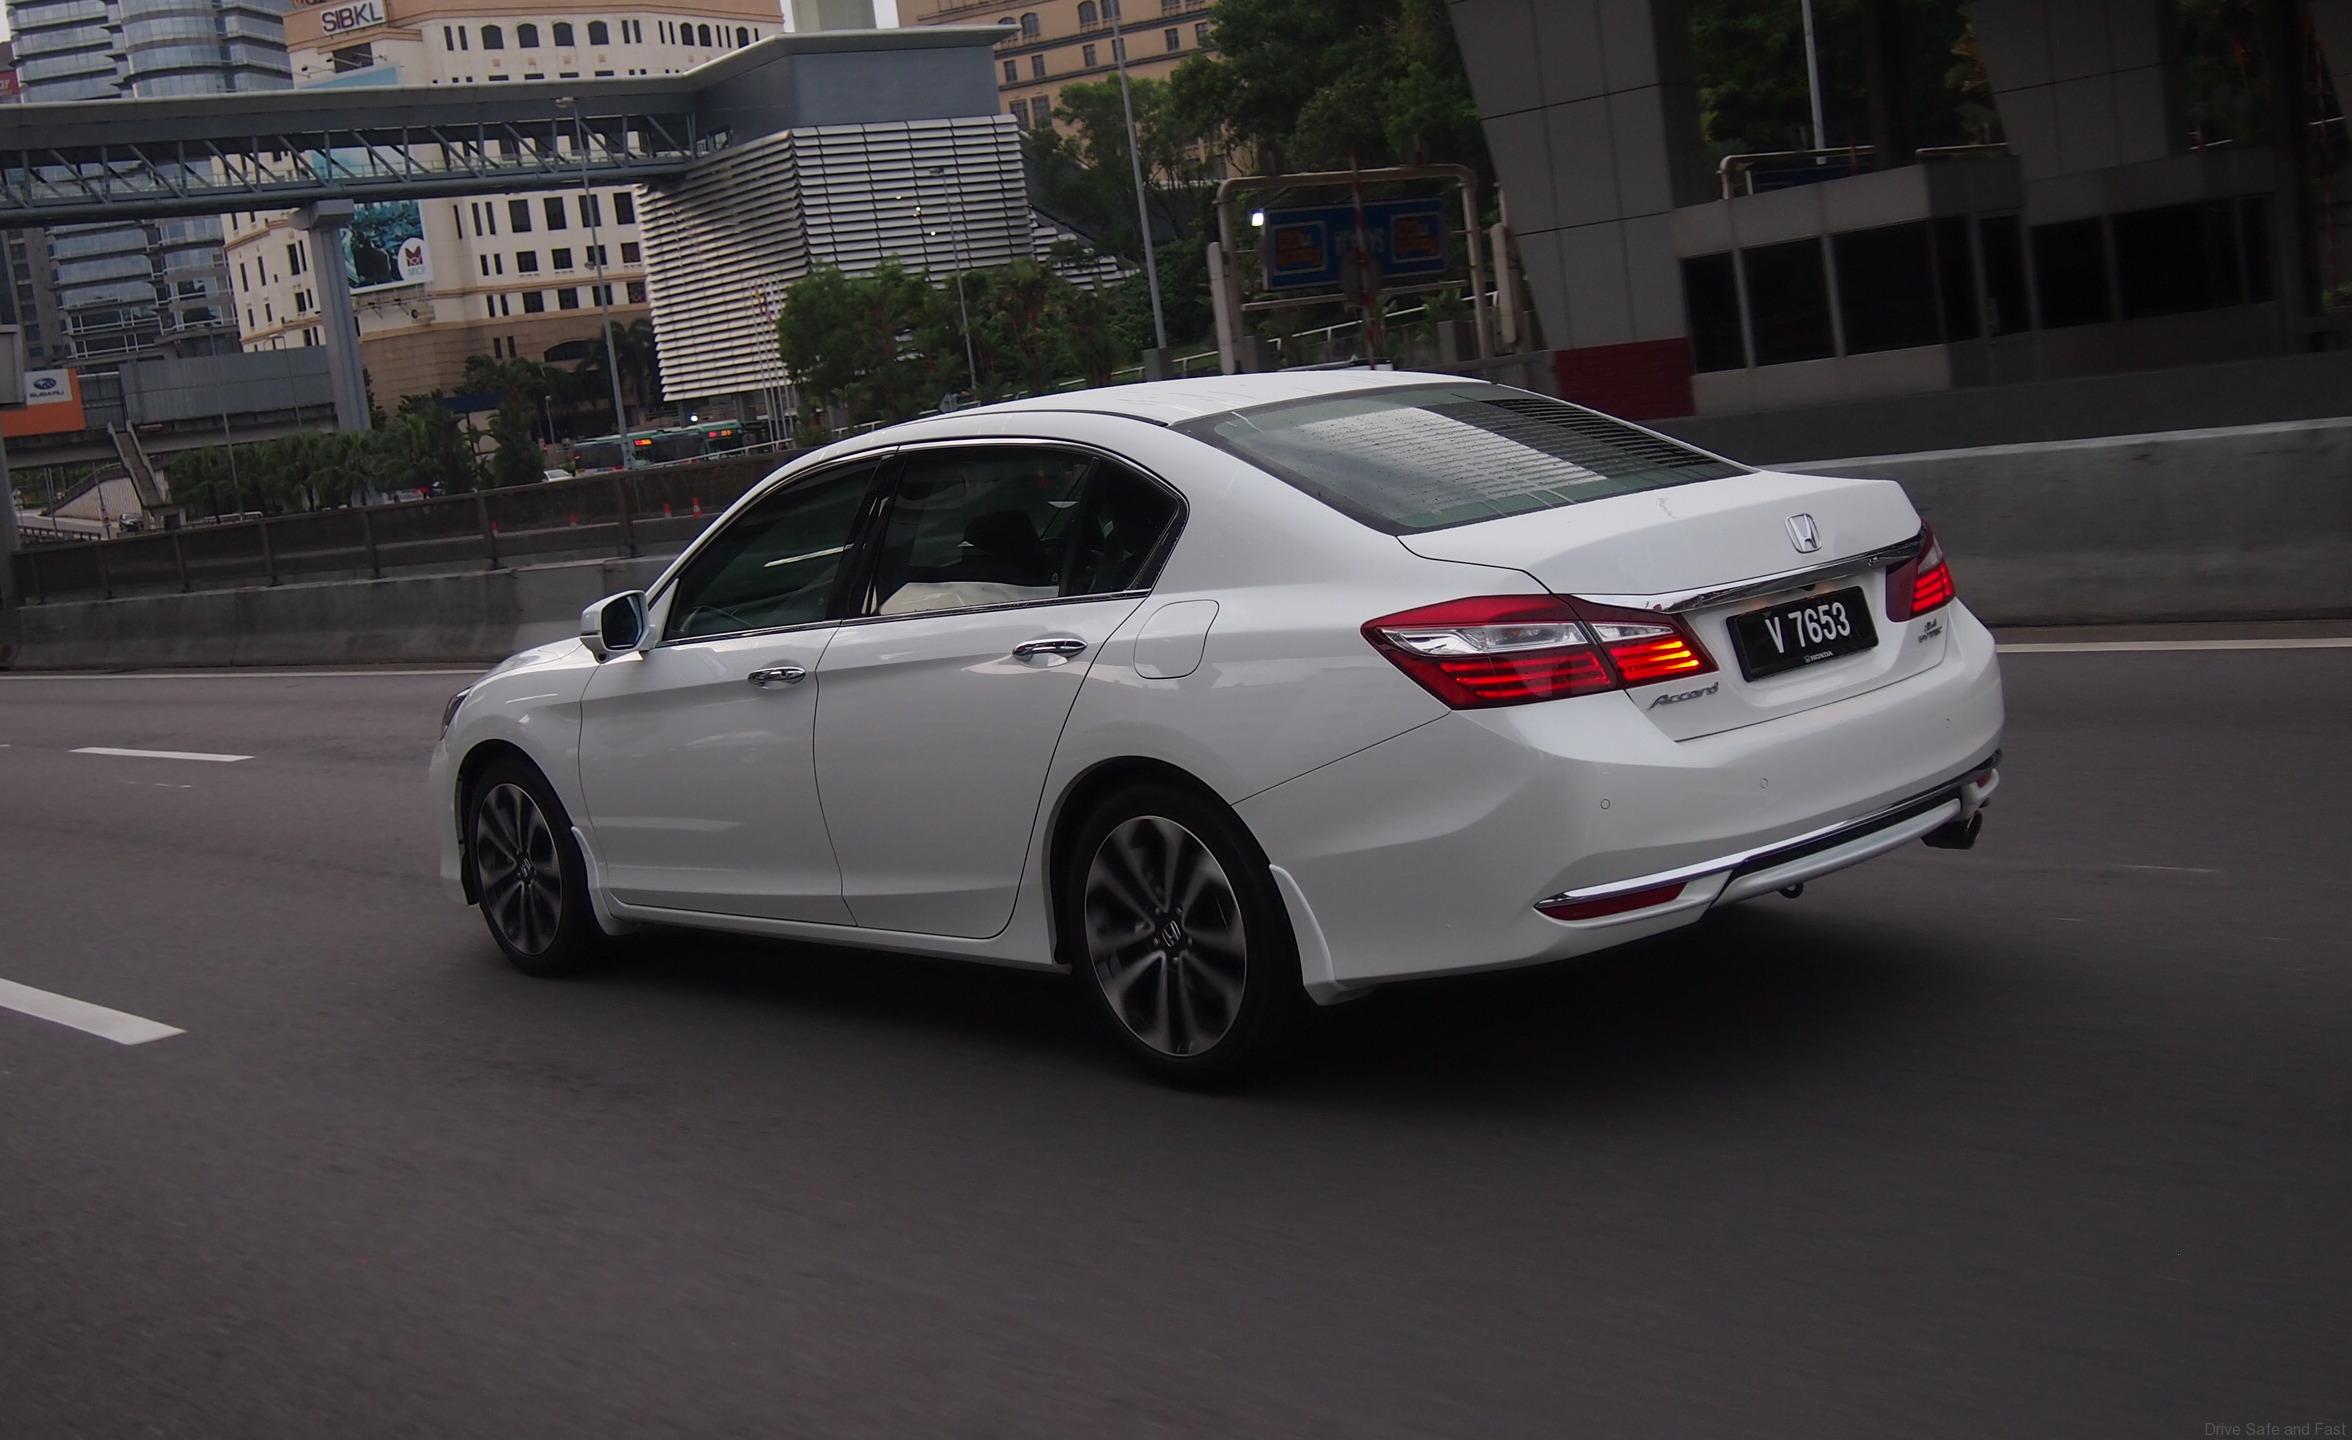 Honda Accord 2.4 VTiL Review The Best One Yet